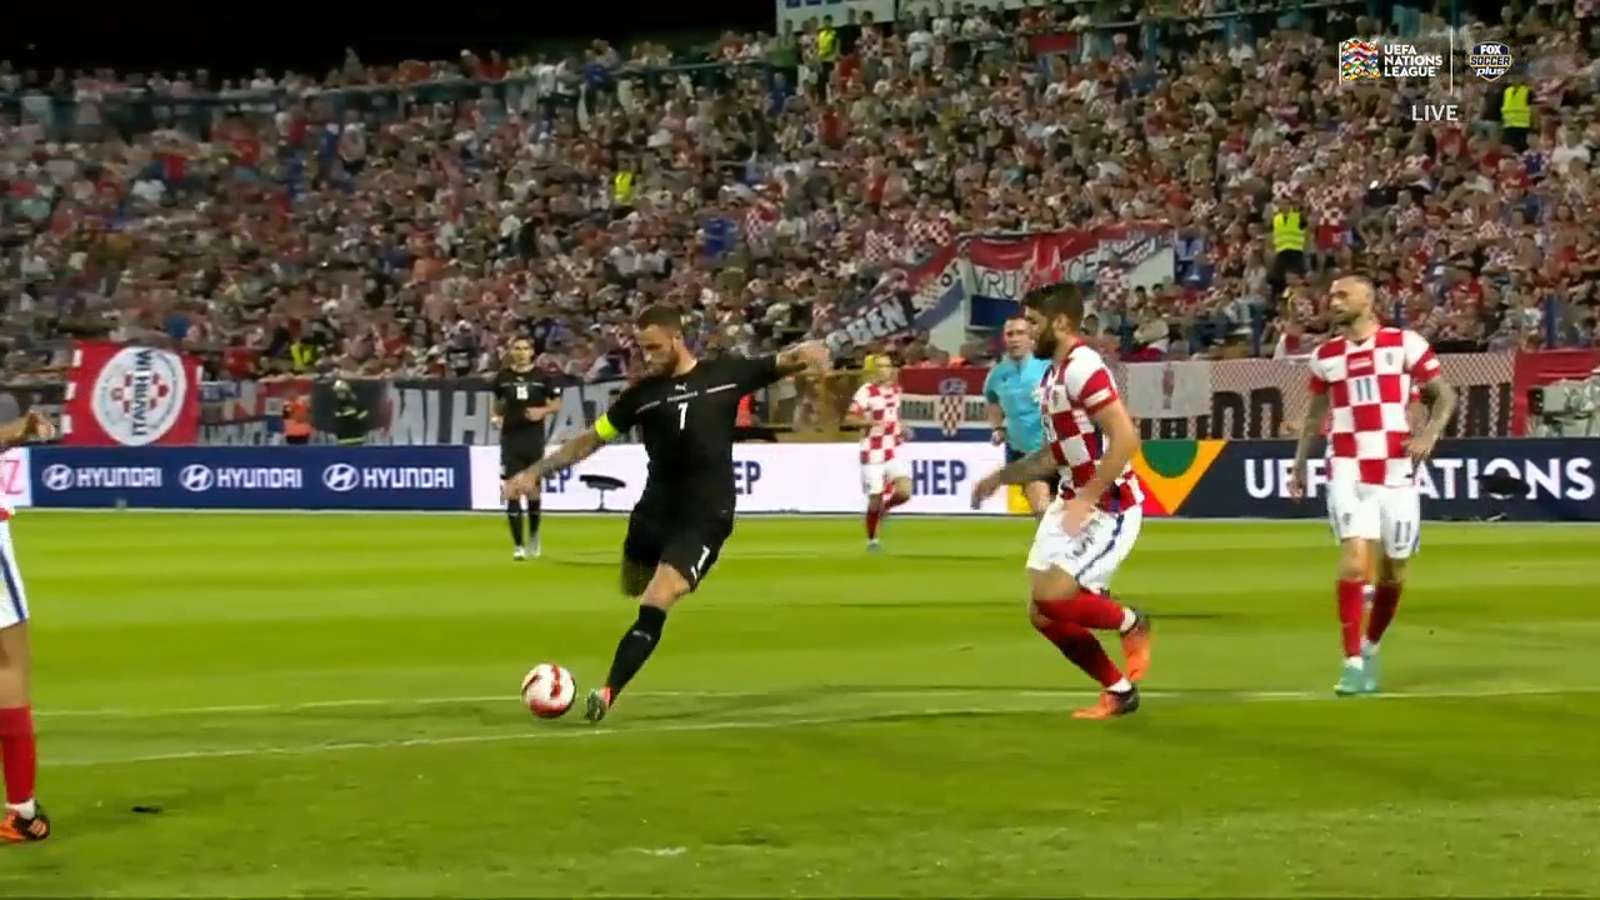 Marko Arnautovic weaves past defenders to give Austria a 1-0 lead